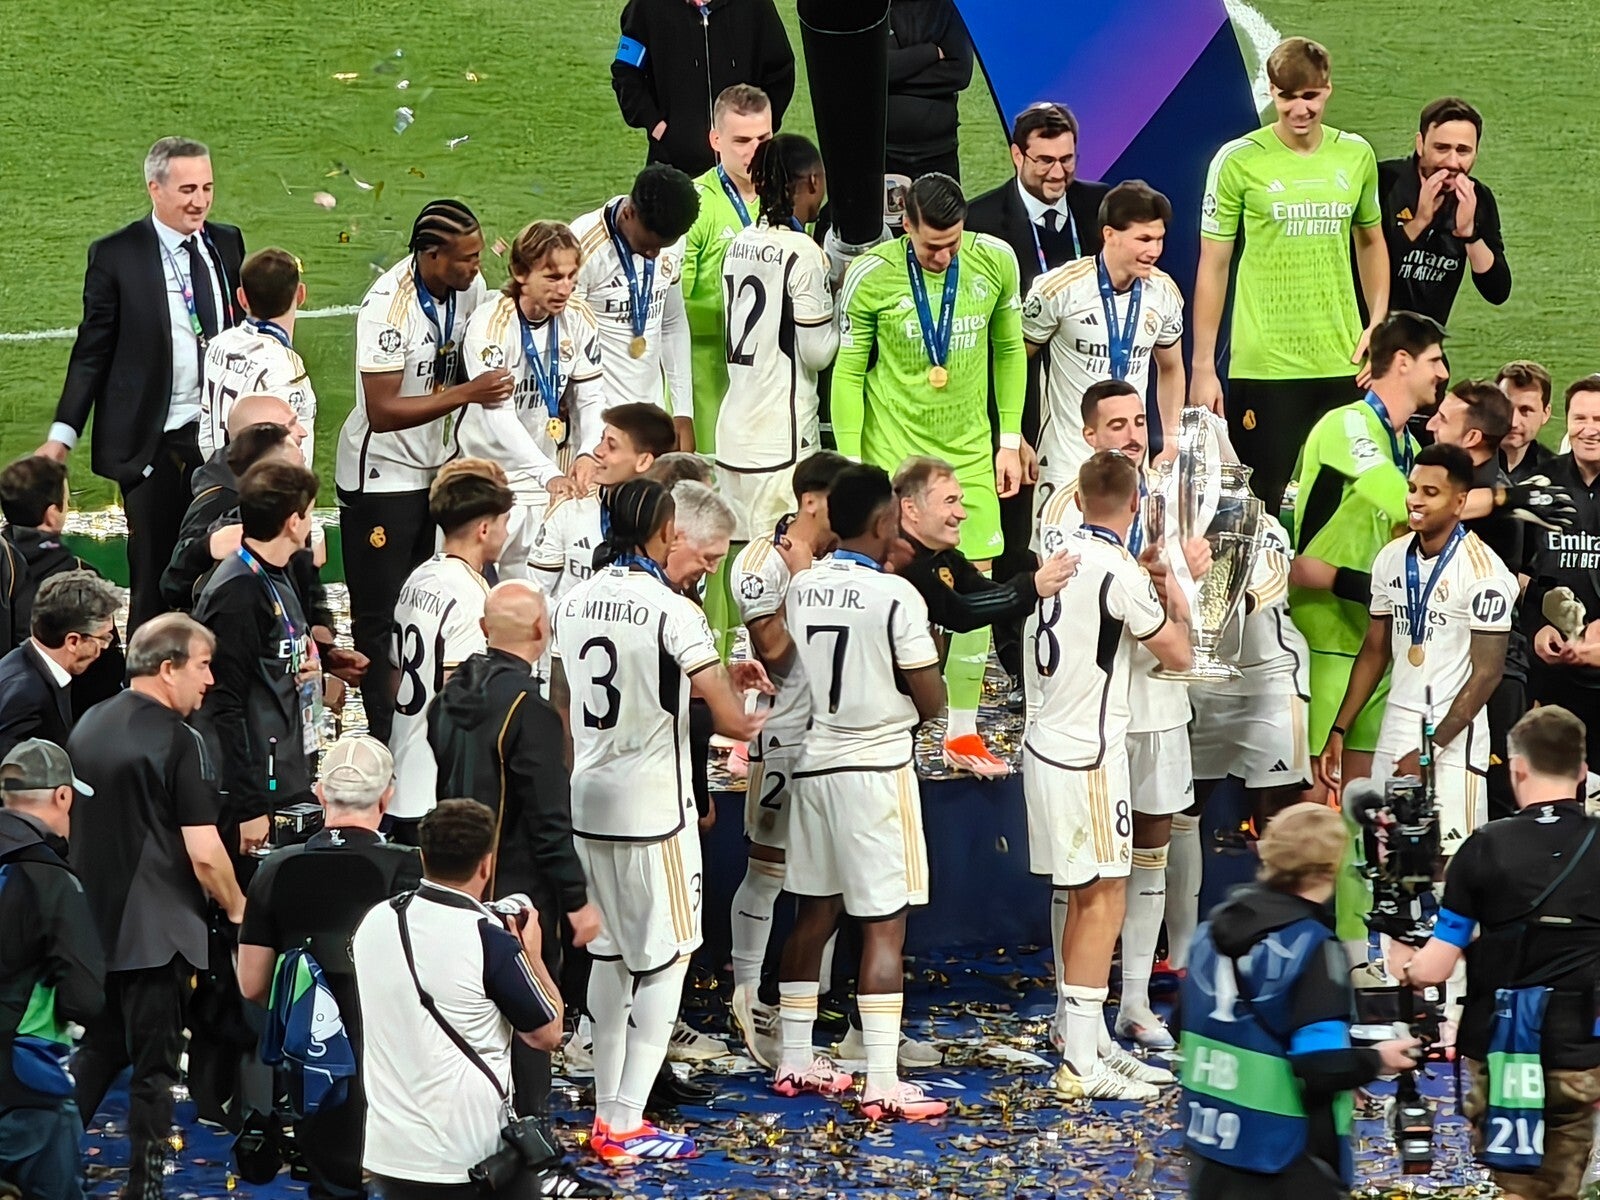 Periscope zoom range allows for some quality close-ups from far away - Champions League final festivities mark Oppo&#039;s grand return with Find X7 Ultra camera prowess